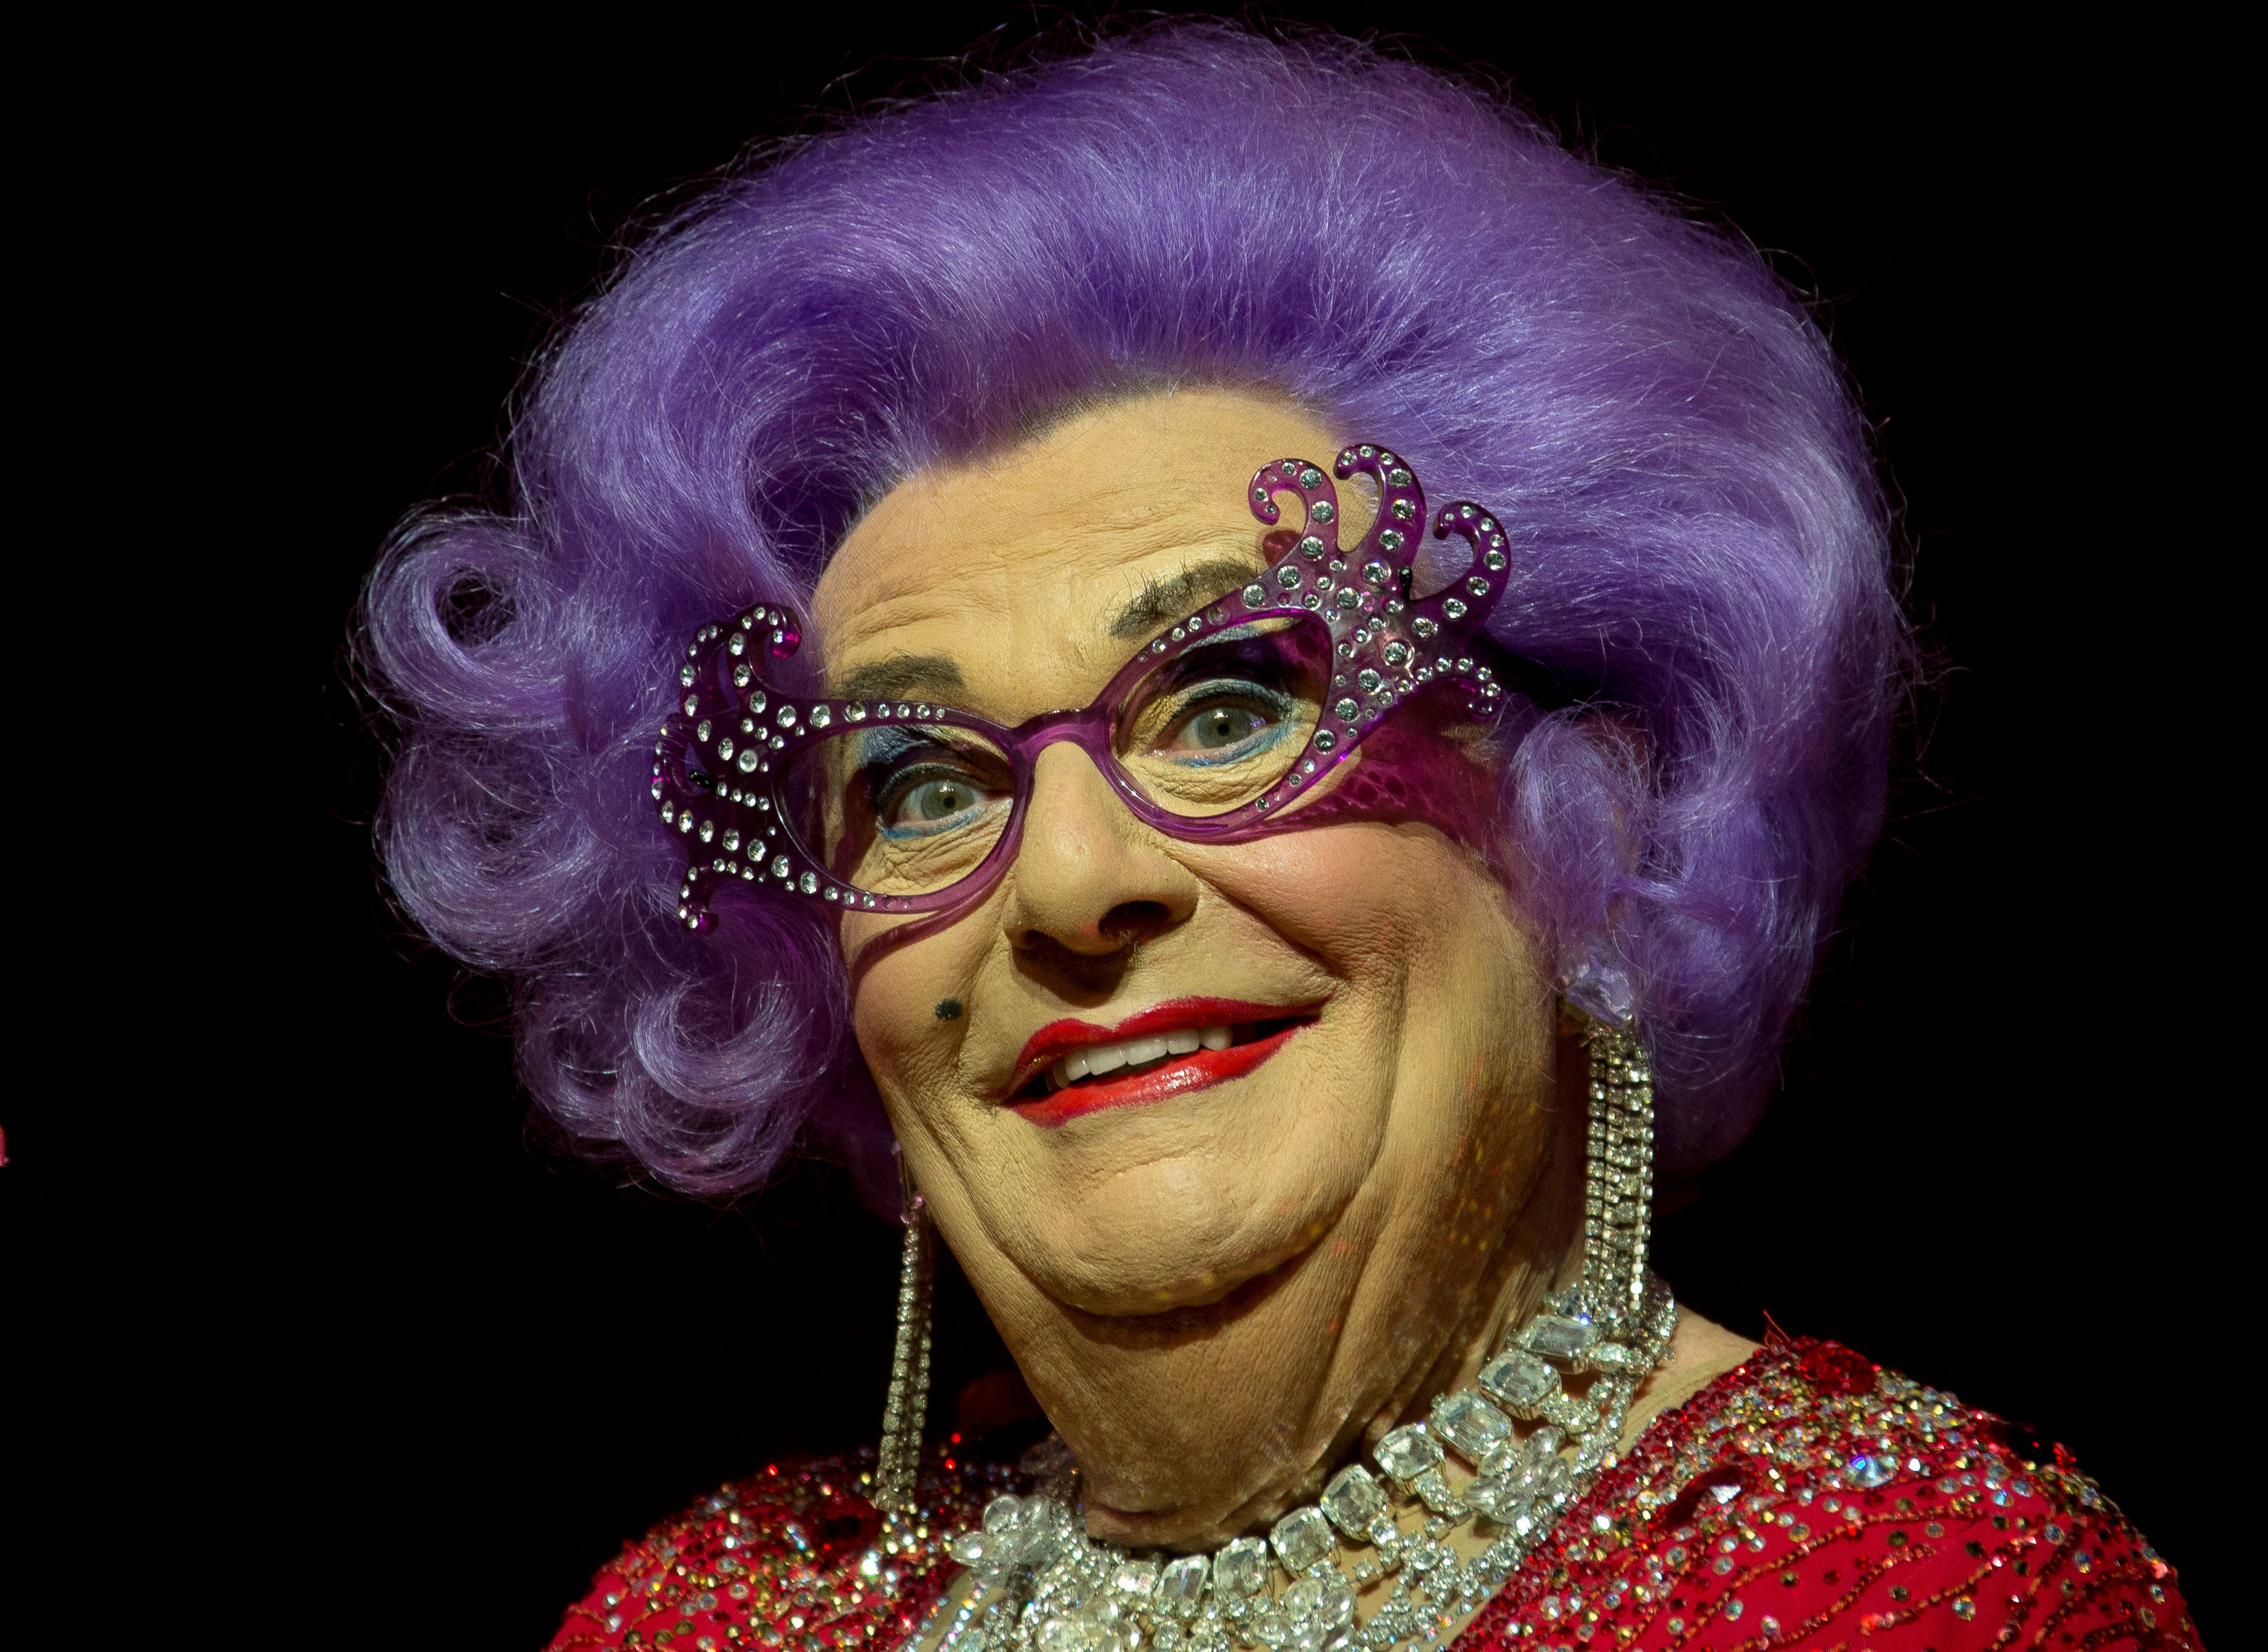 Performing on stage as Dame Edna at the London Palladium in 2013